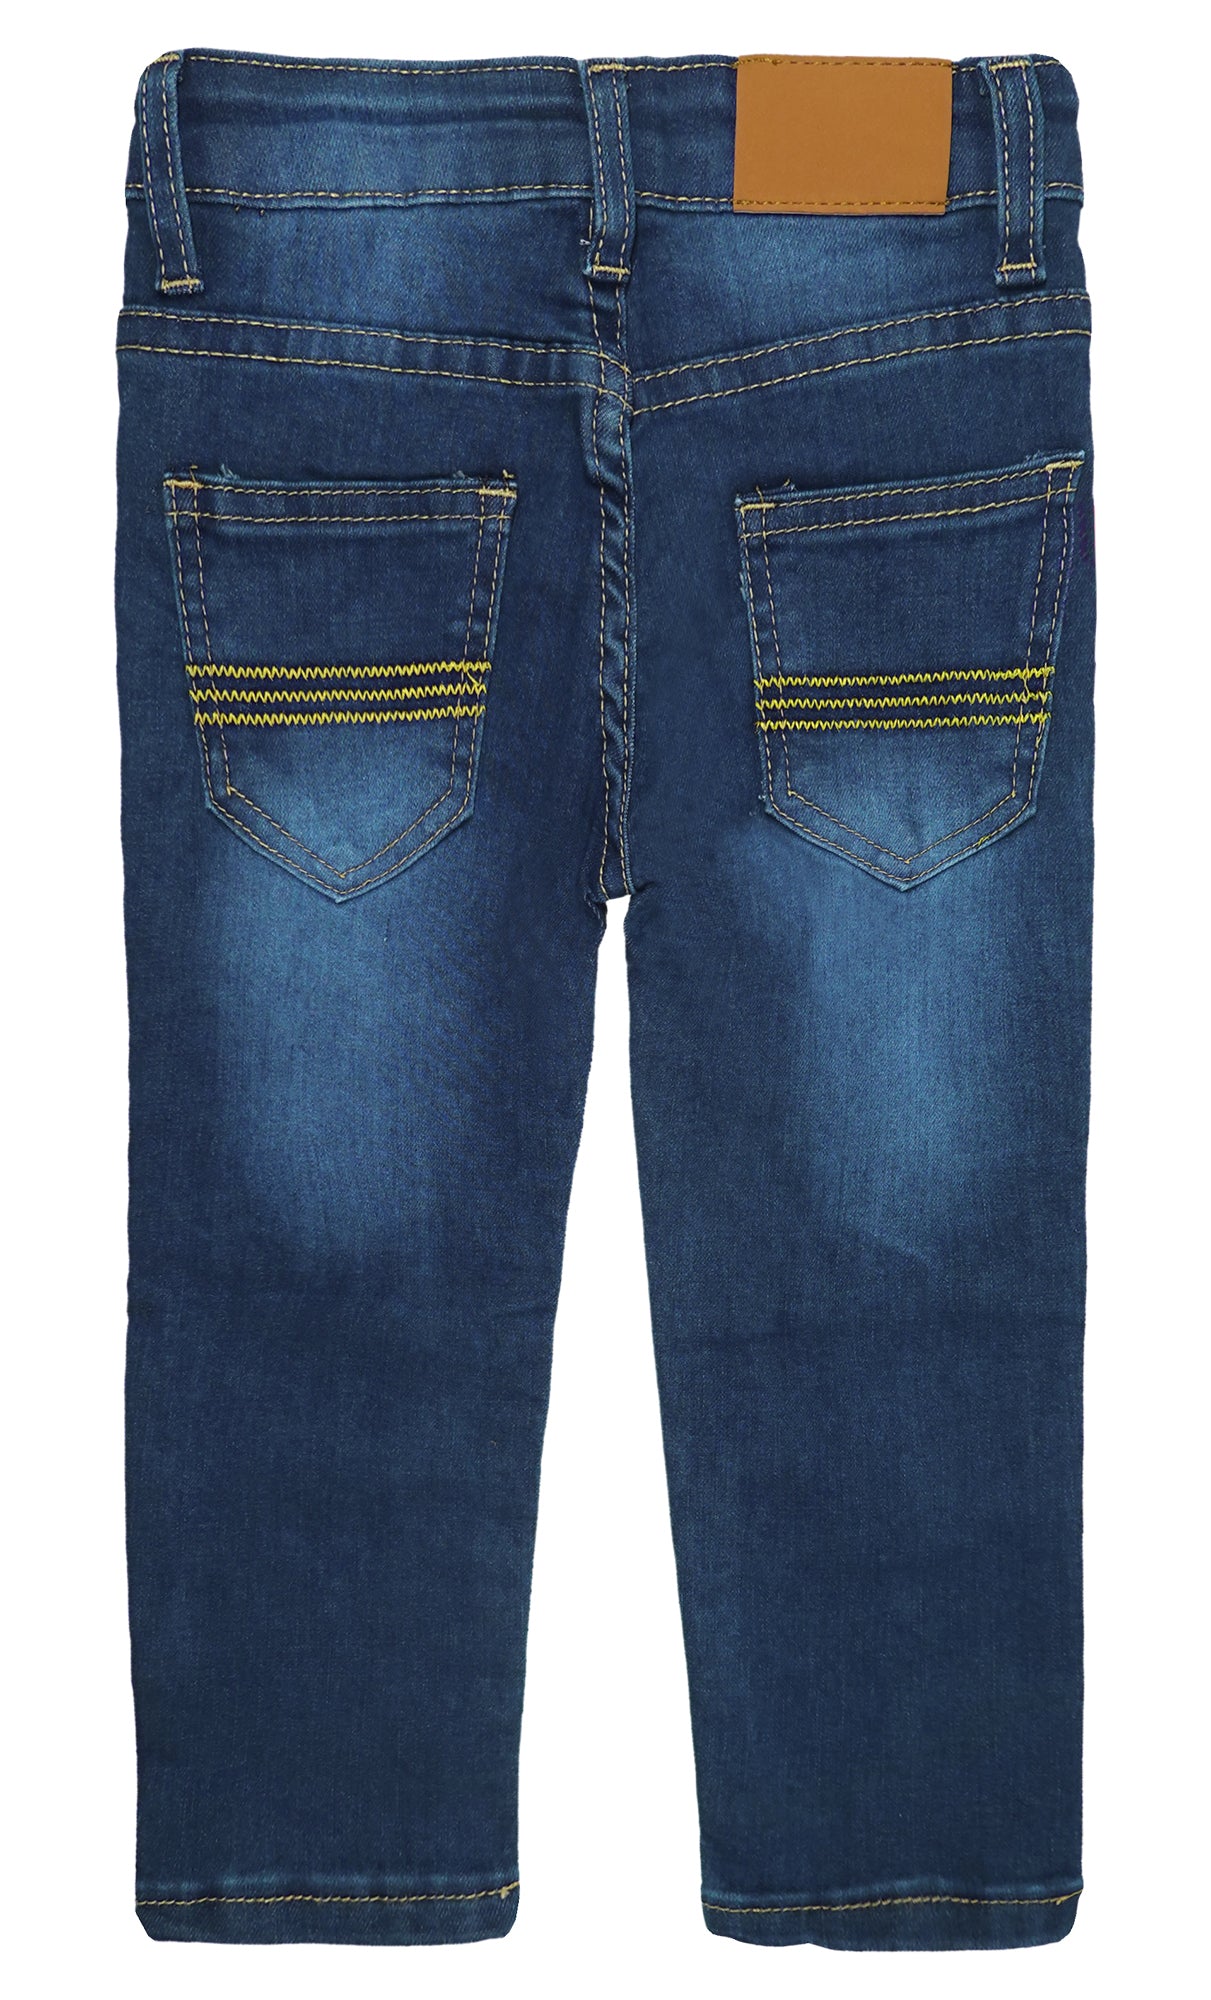 Little Girls Boys Elastic Band Ripped Straight Fit Soft Jeans